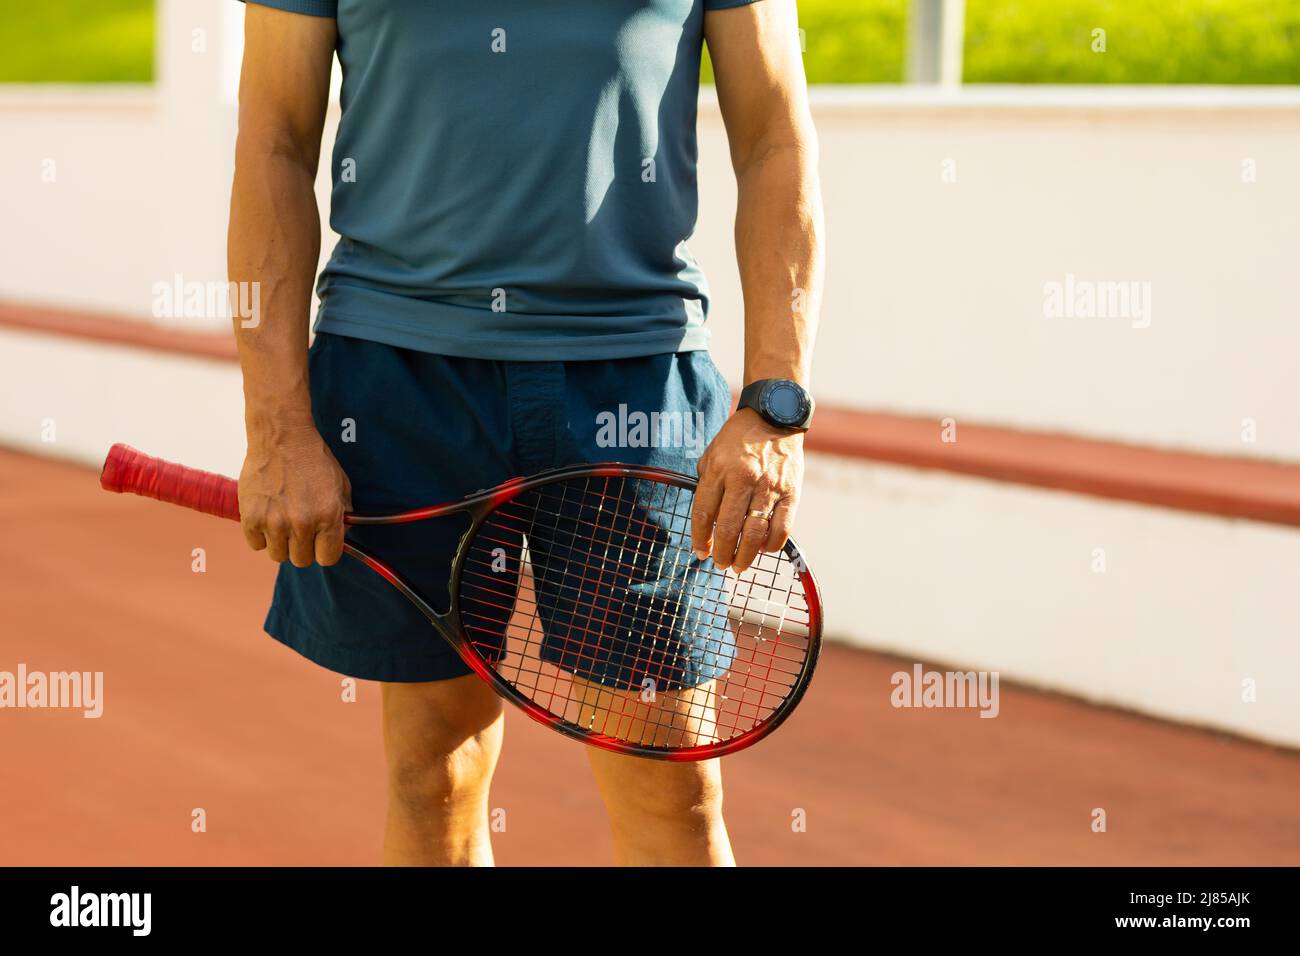 Midsection of biracial senior man wearing sports clothing holding racket while standing in court Stock Photo